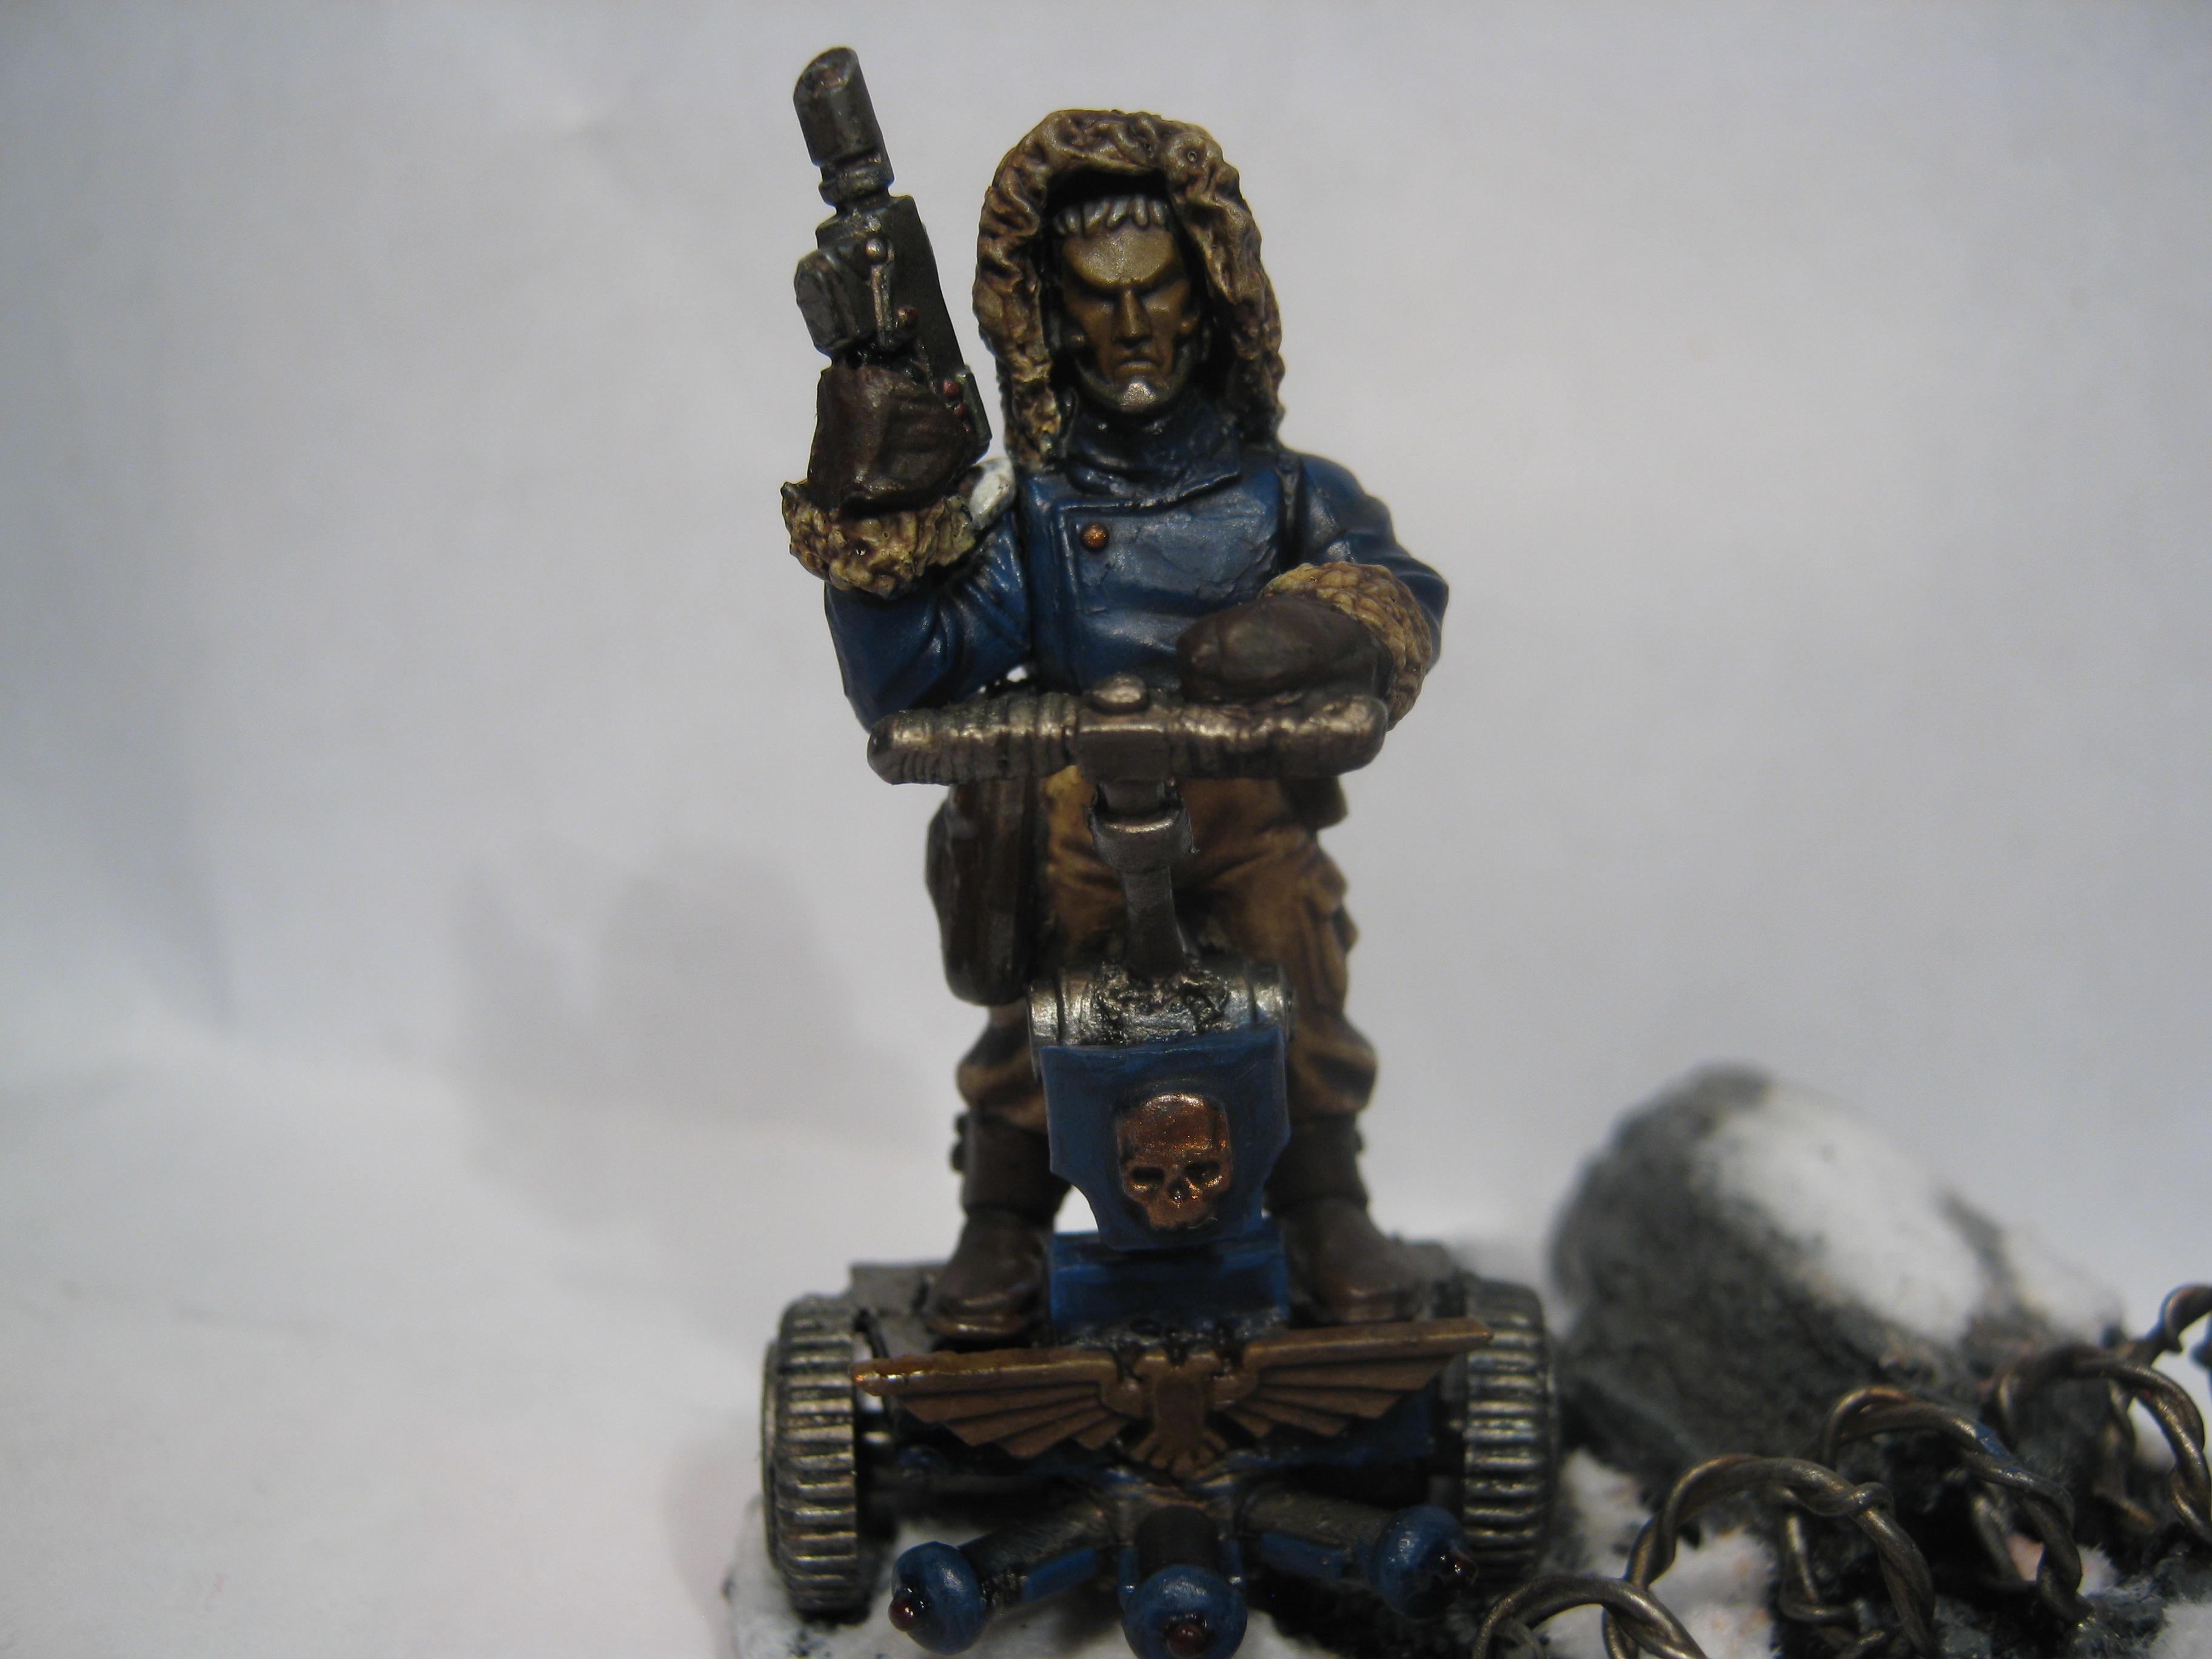 Conversion, Imperial Guard, Rough Riders, Segway, Snow, Warhammer 40,000